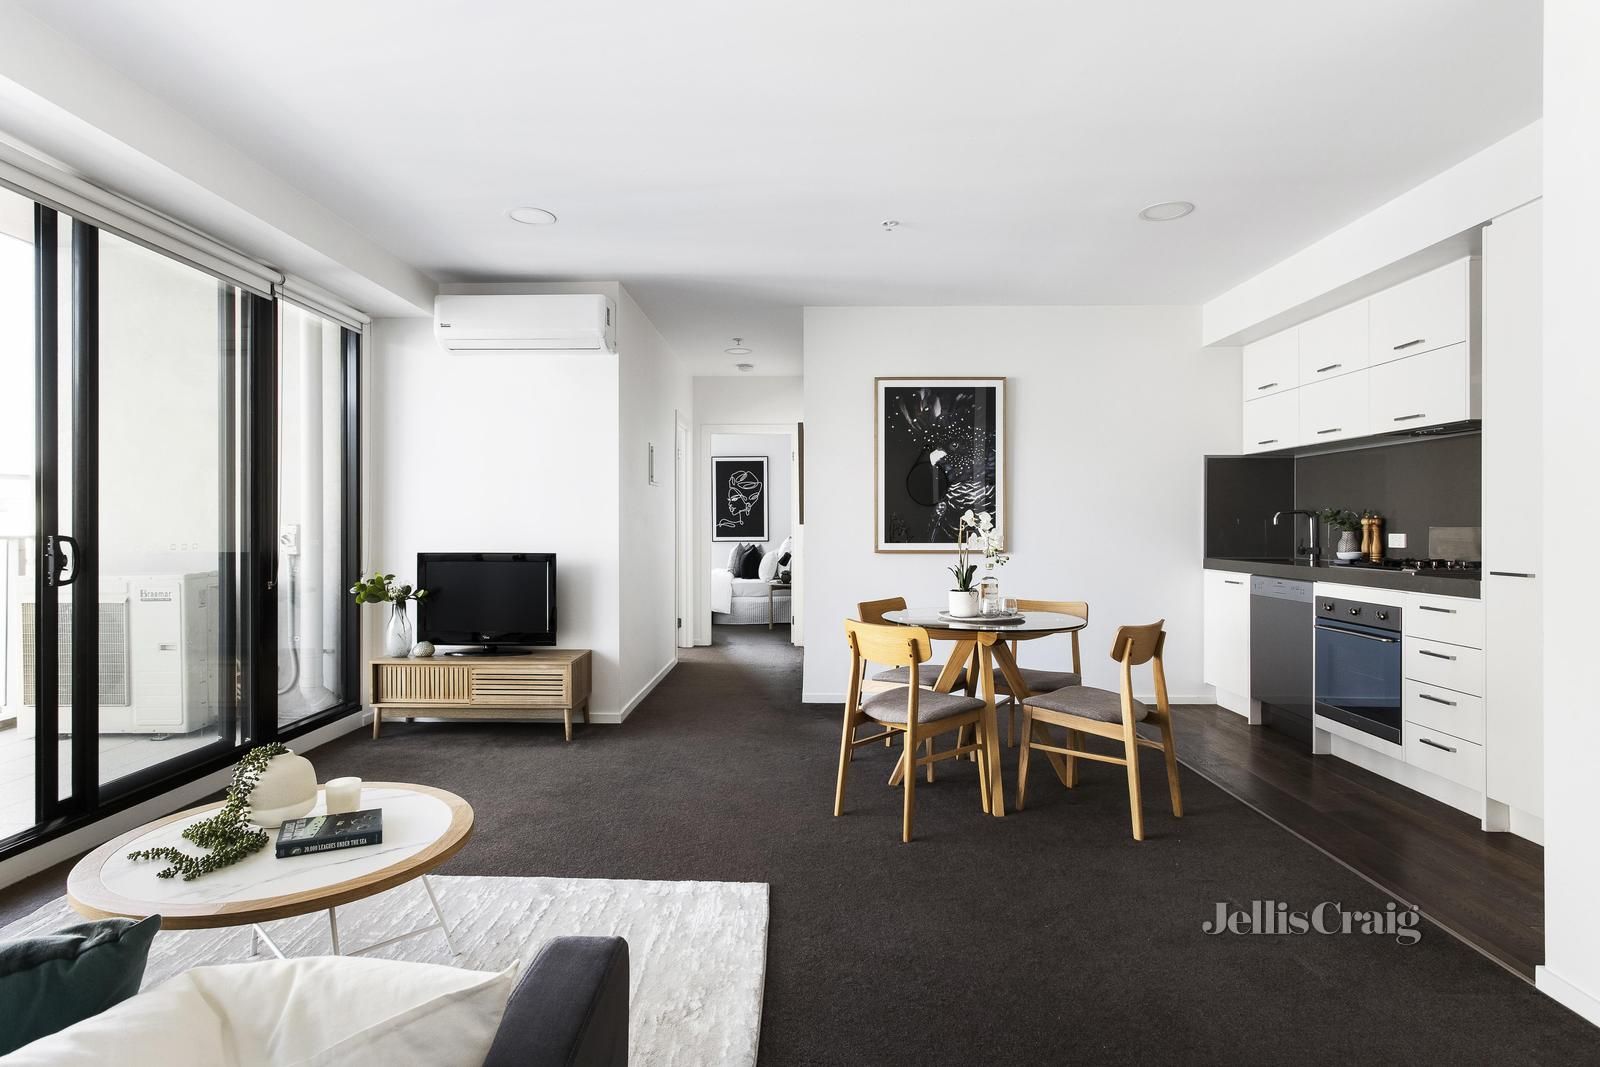 2 bedrooms Apartment / Unit / Flat in 207/72 Gadd Street NORTHCOTE VIC, 3070